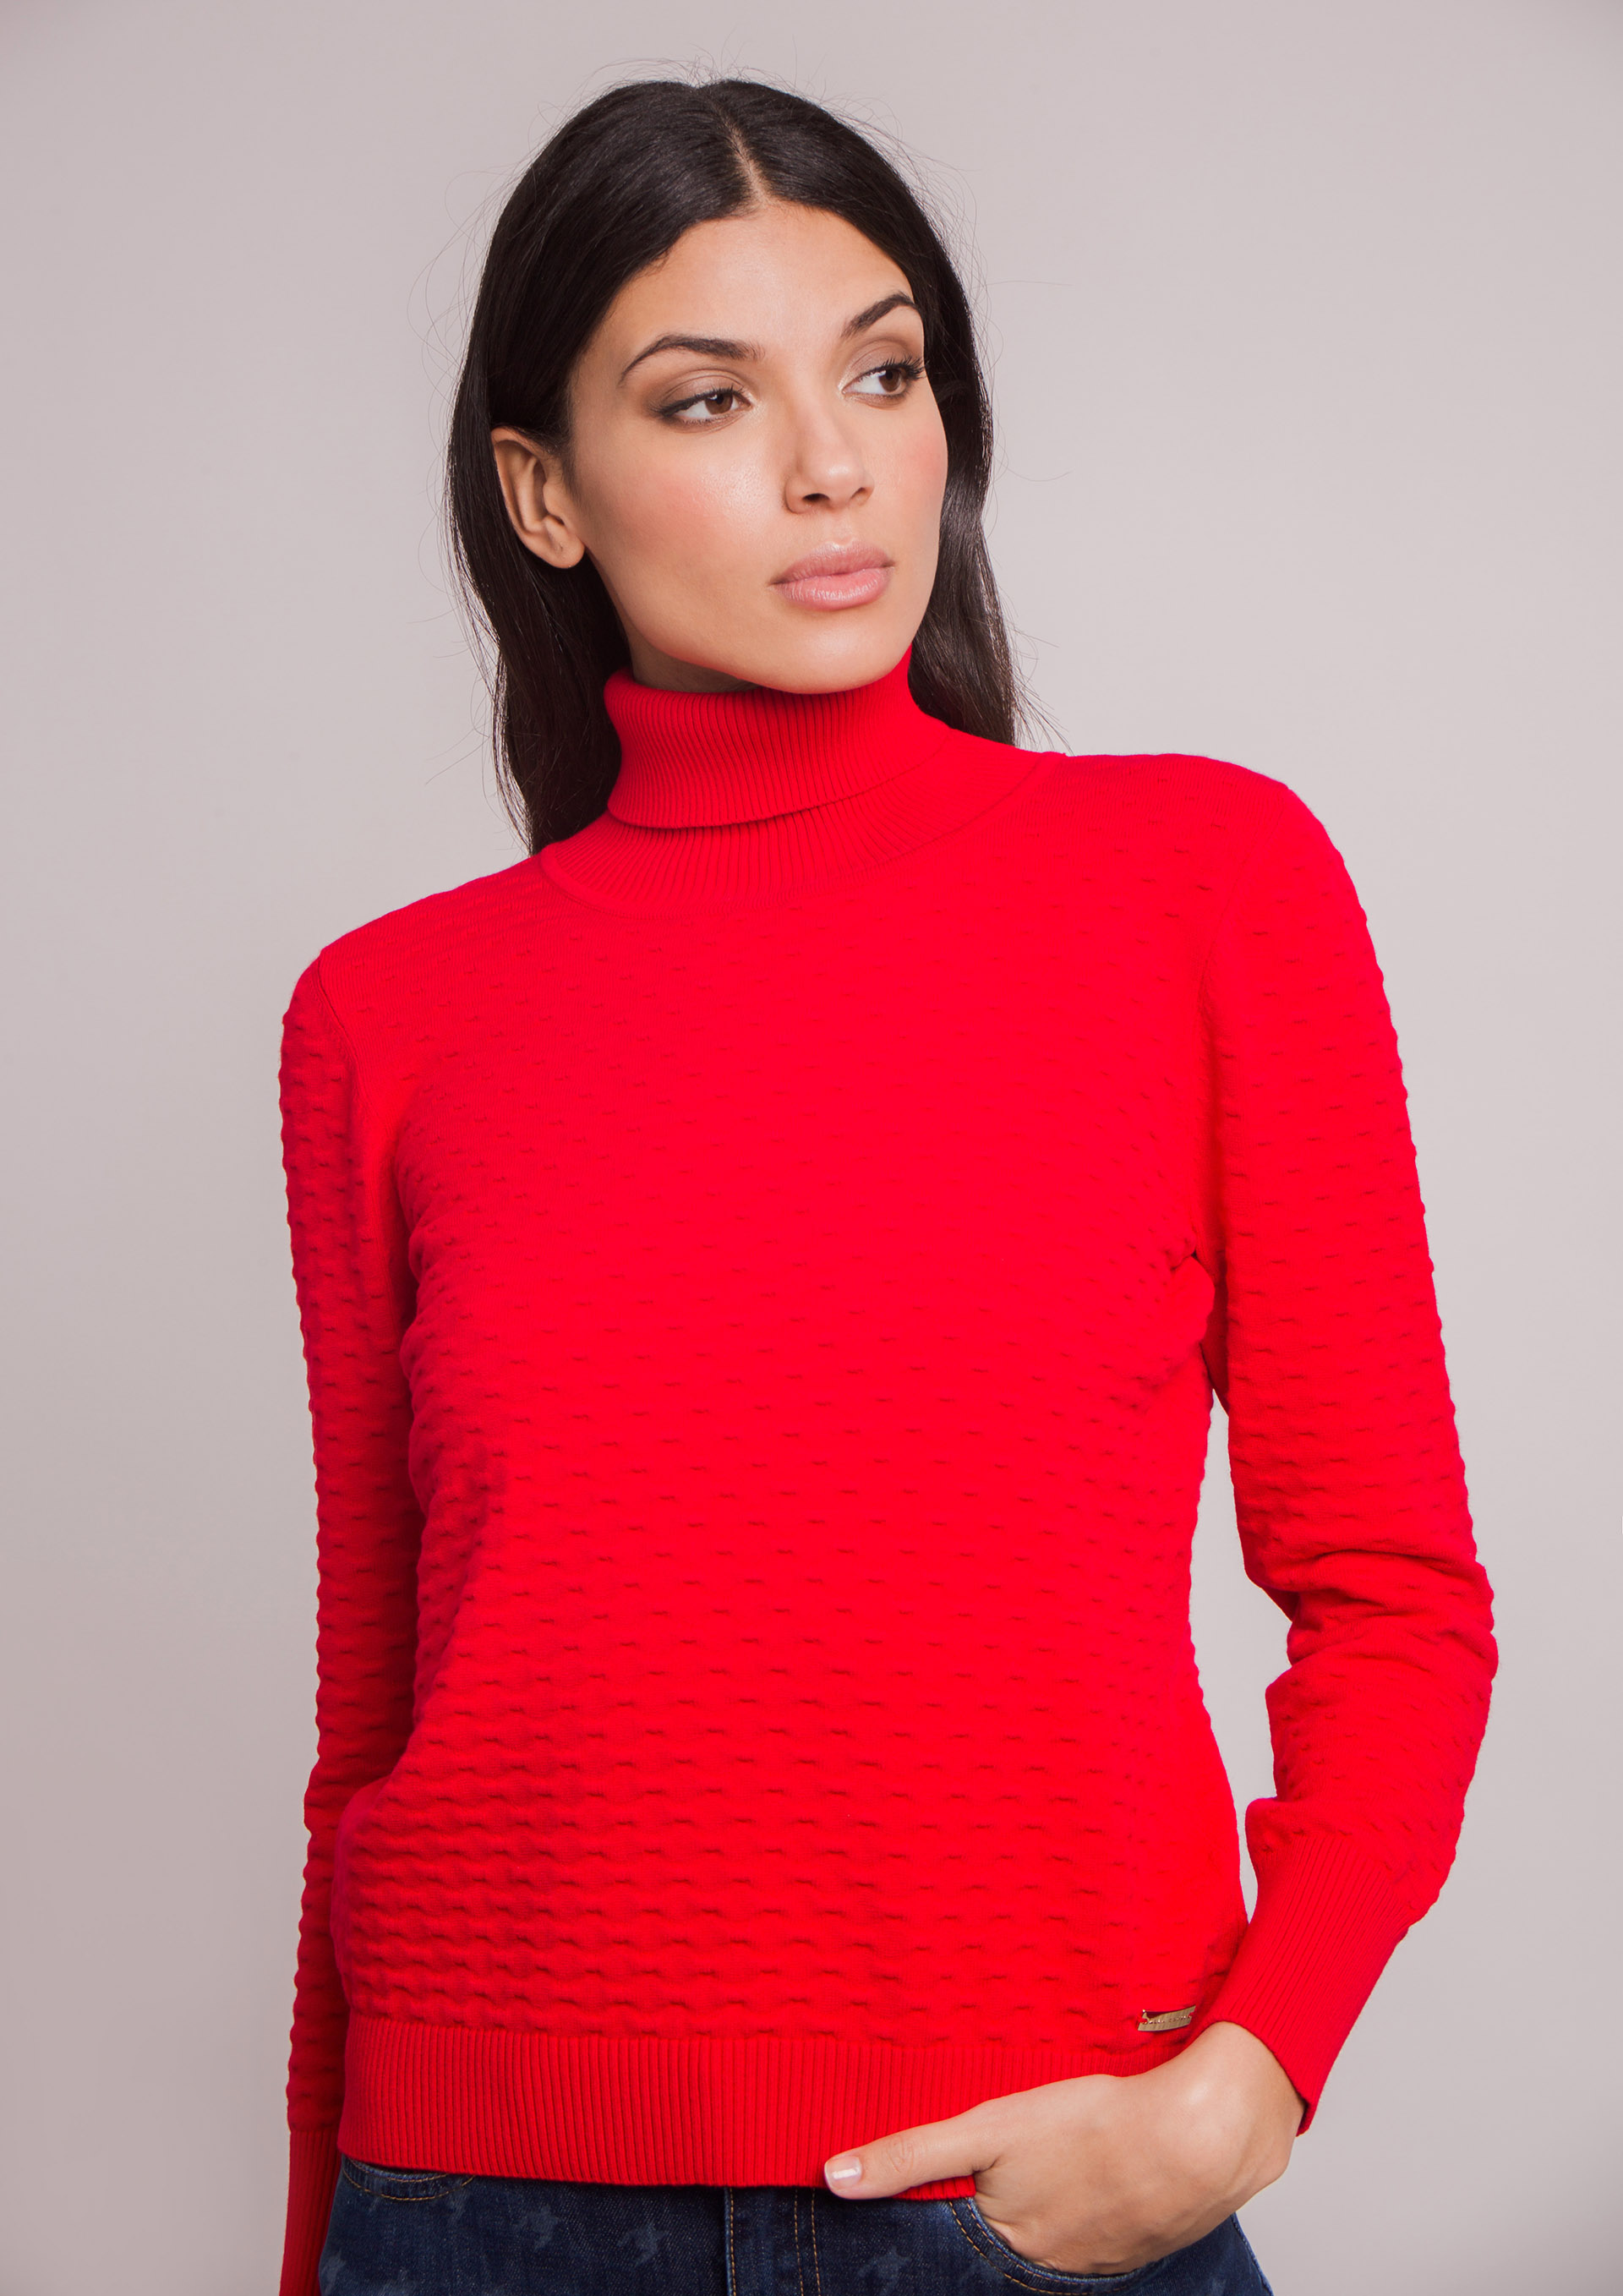 Red knit sweater.